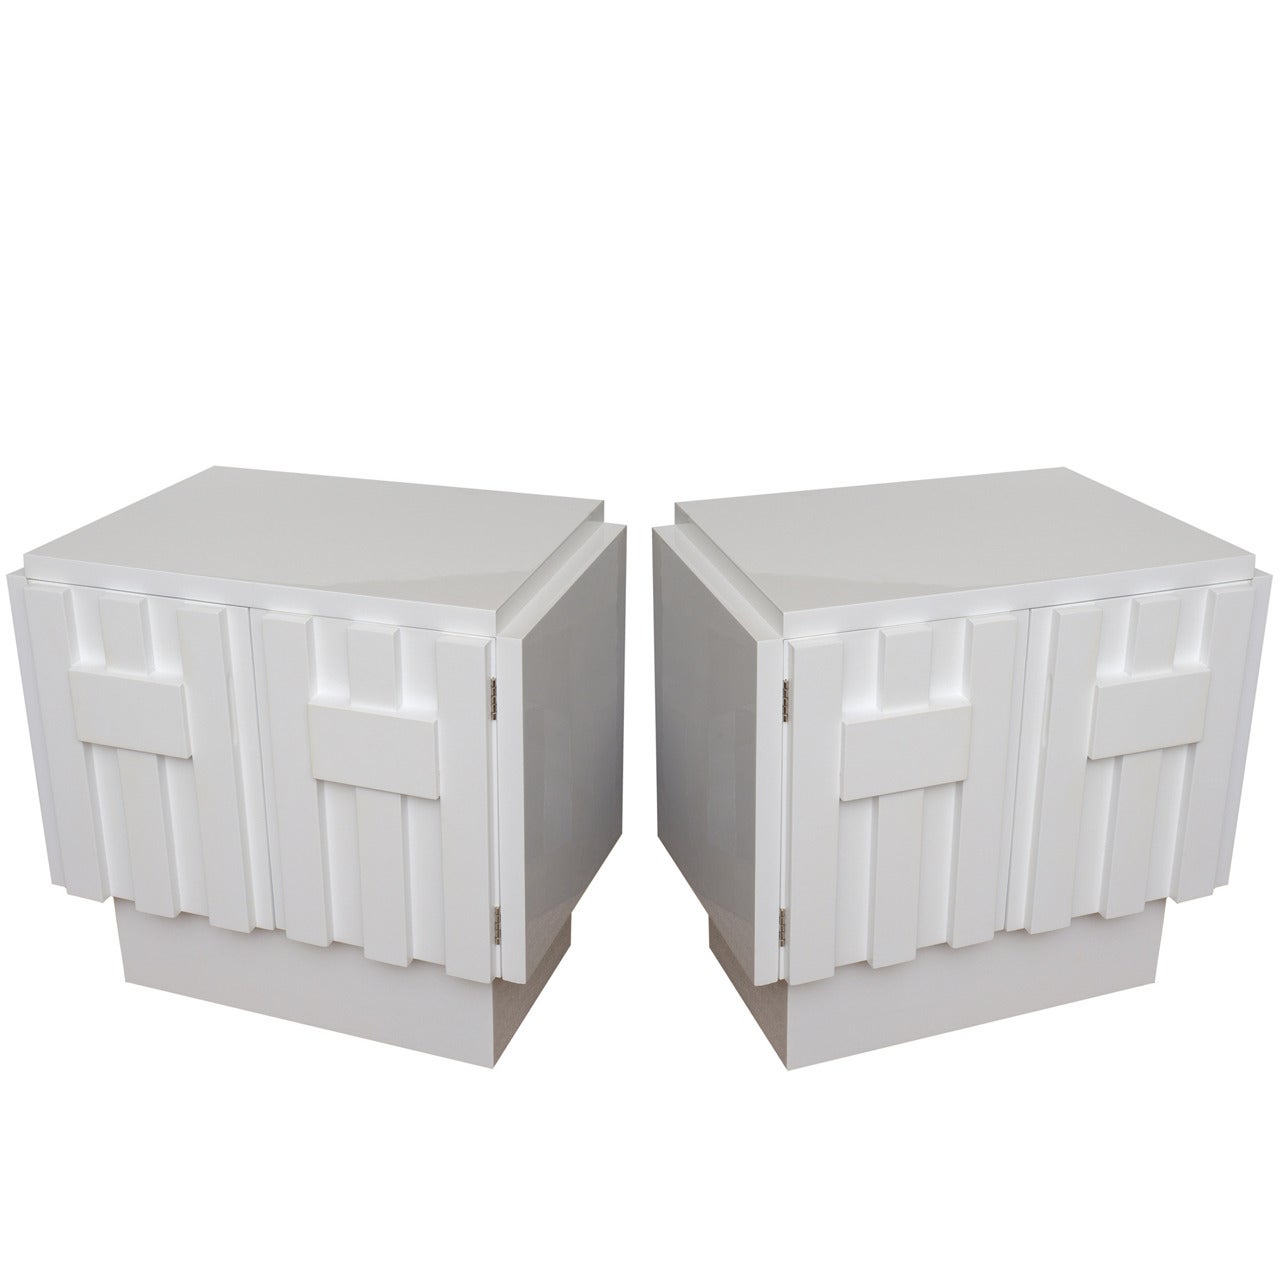 Pair of Sculptural Louise Nevelson or Cubist Style White Lacquered Nightstands